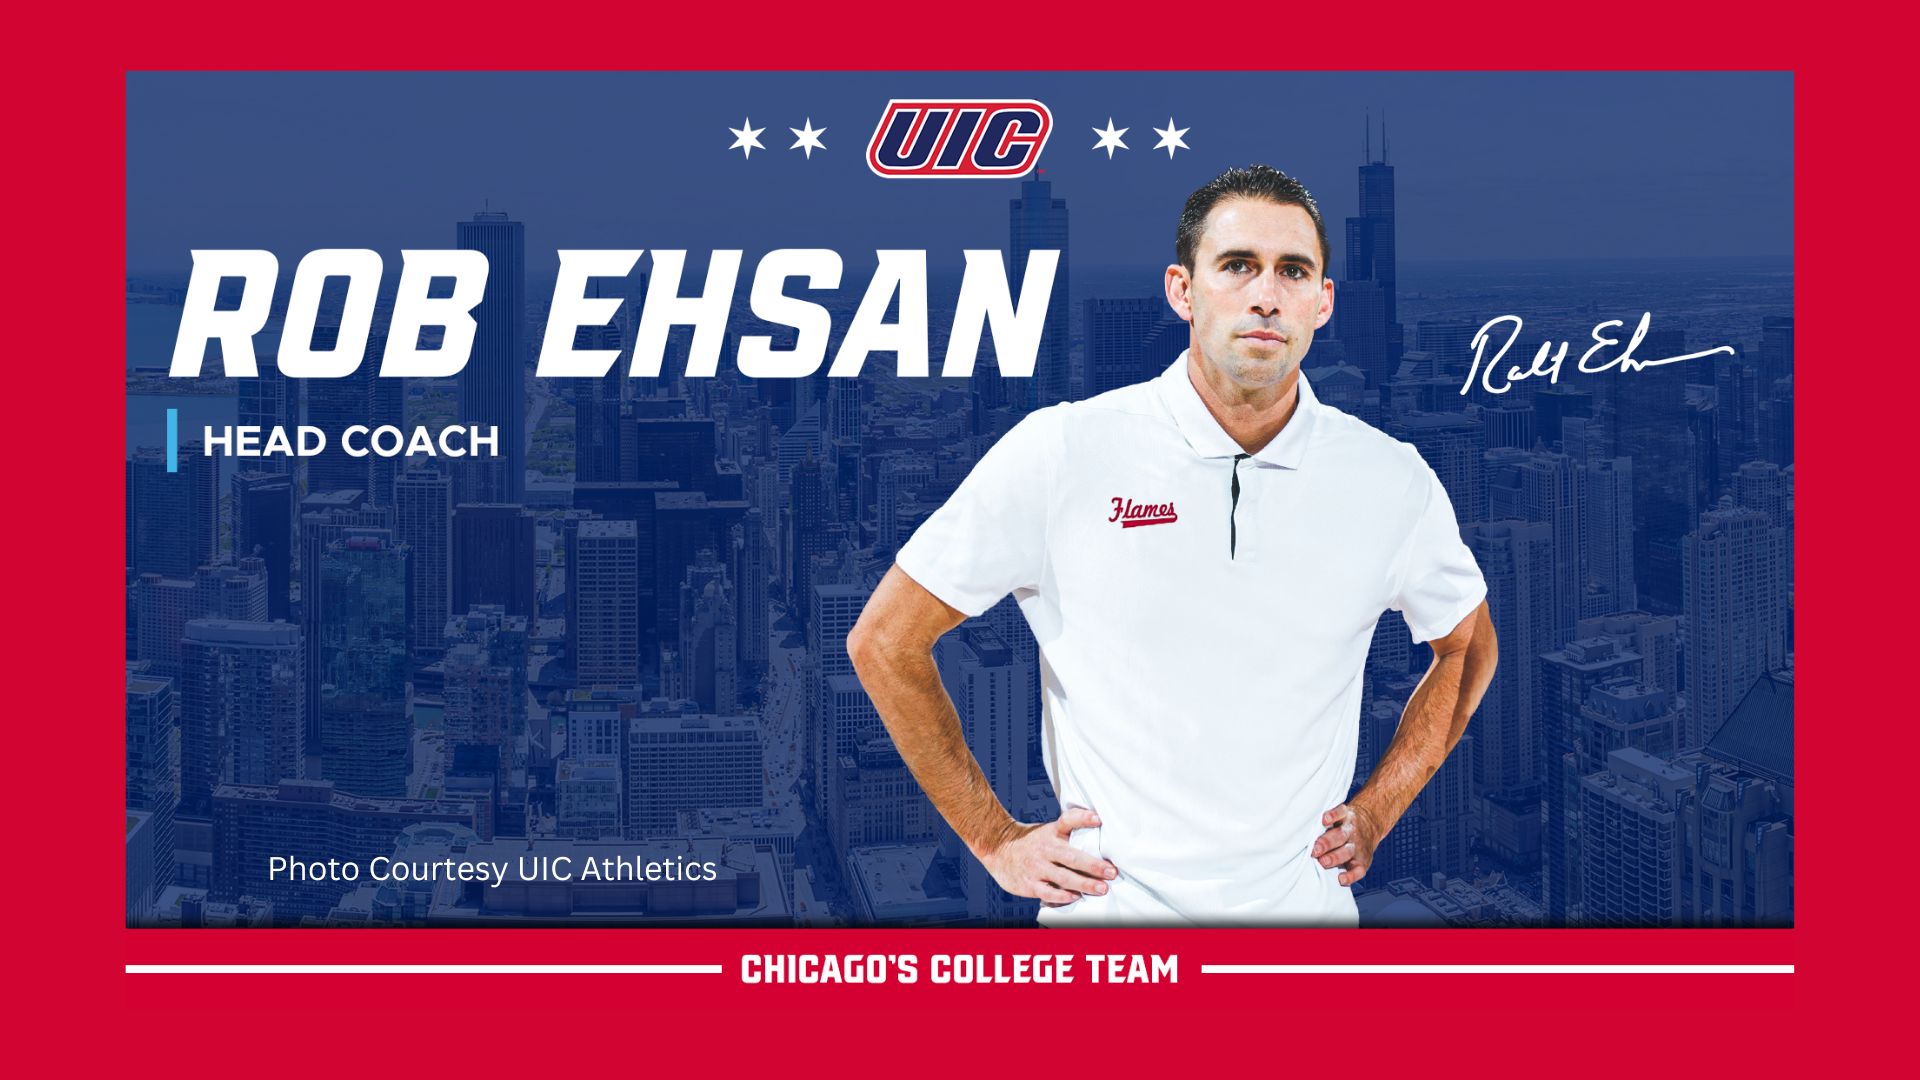 Rob Ehsan: UIC’s New Basketball Head Coach with a Strong Recruiting and Coaching Background